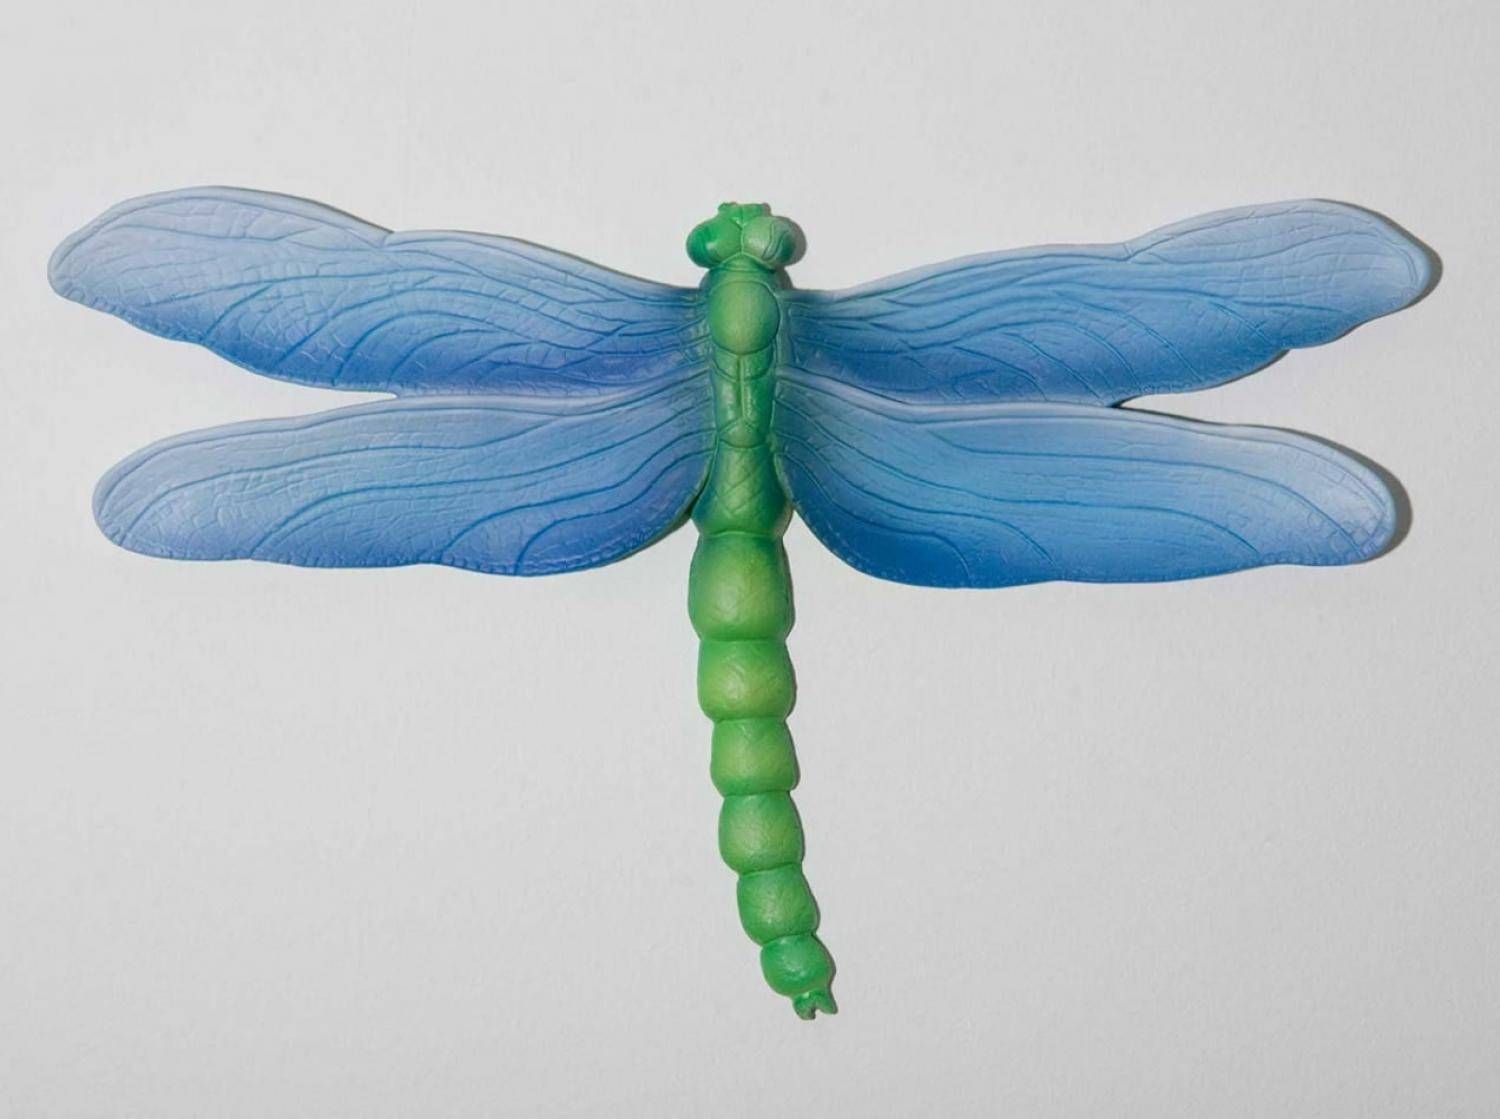 3d Wall Art Dragonfly | Wallartideas Within 2017 Dragonfly 3d Wall Art (View 7 of 20)